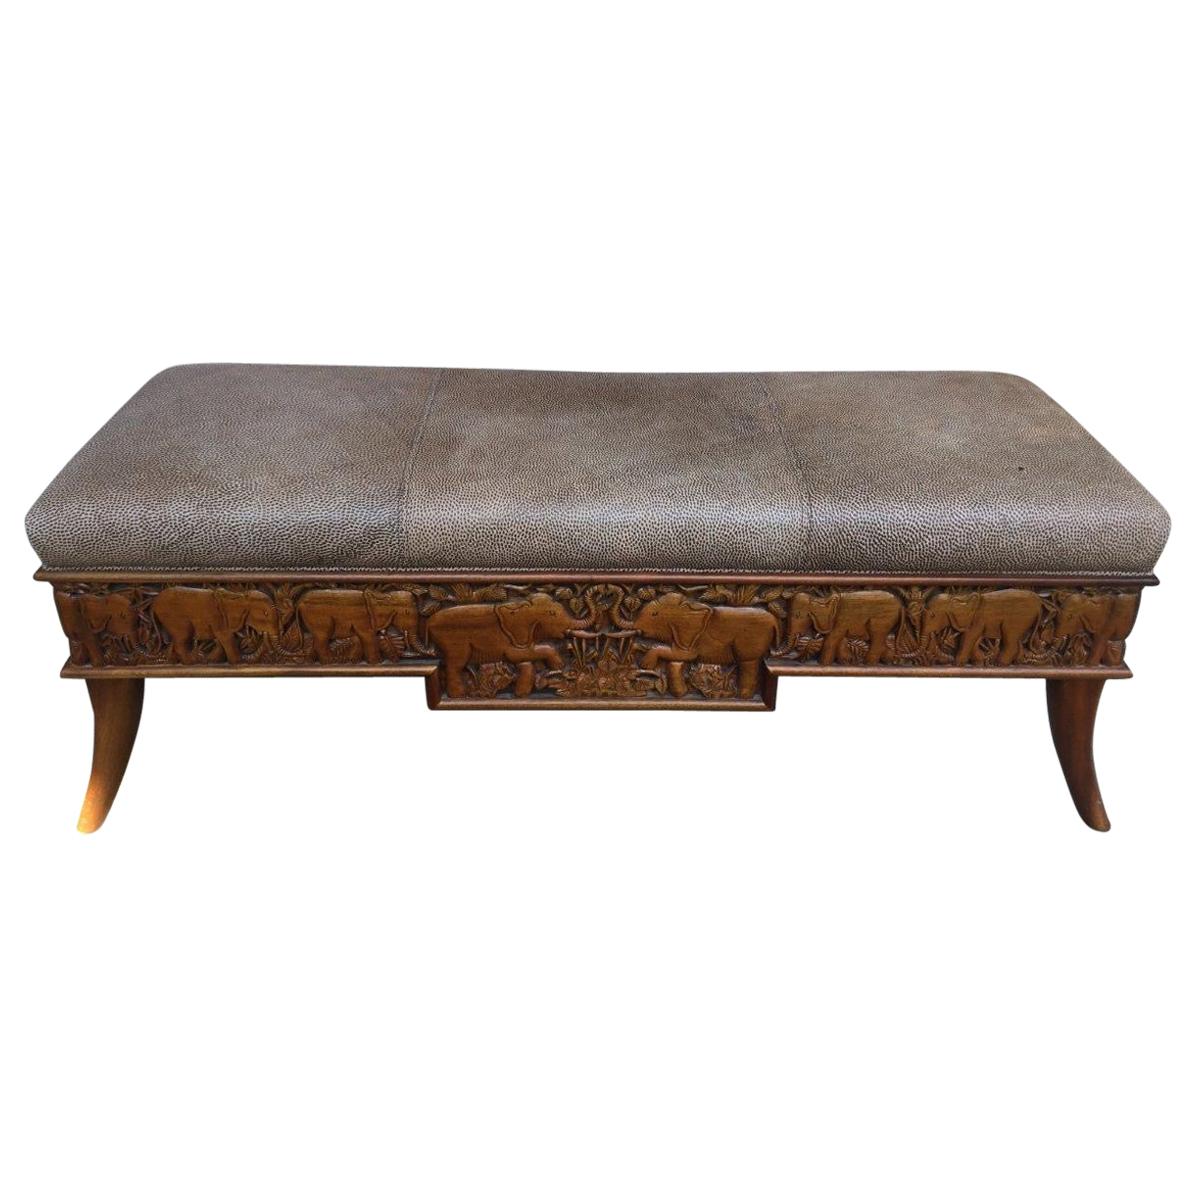 Distinguished Vintage Carved Wooden Bench with Animal Print Leather Upholstery